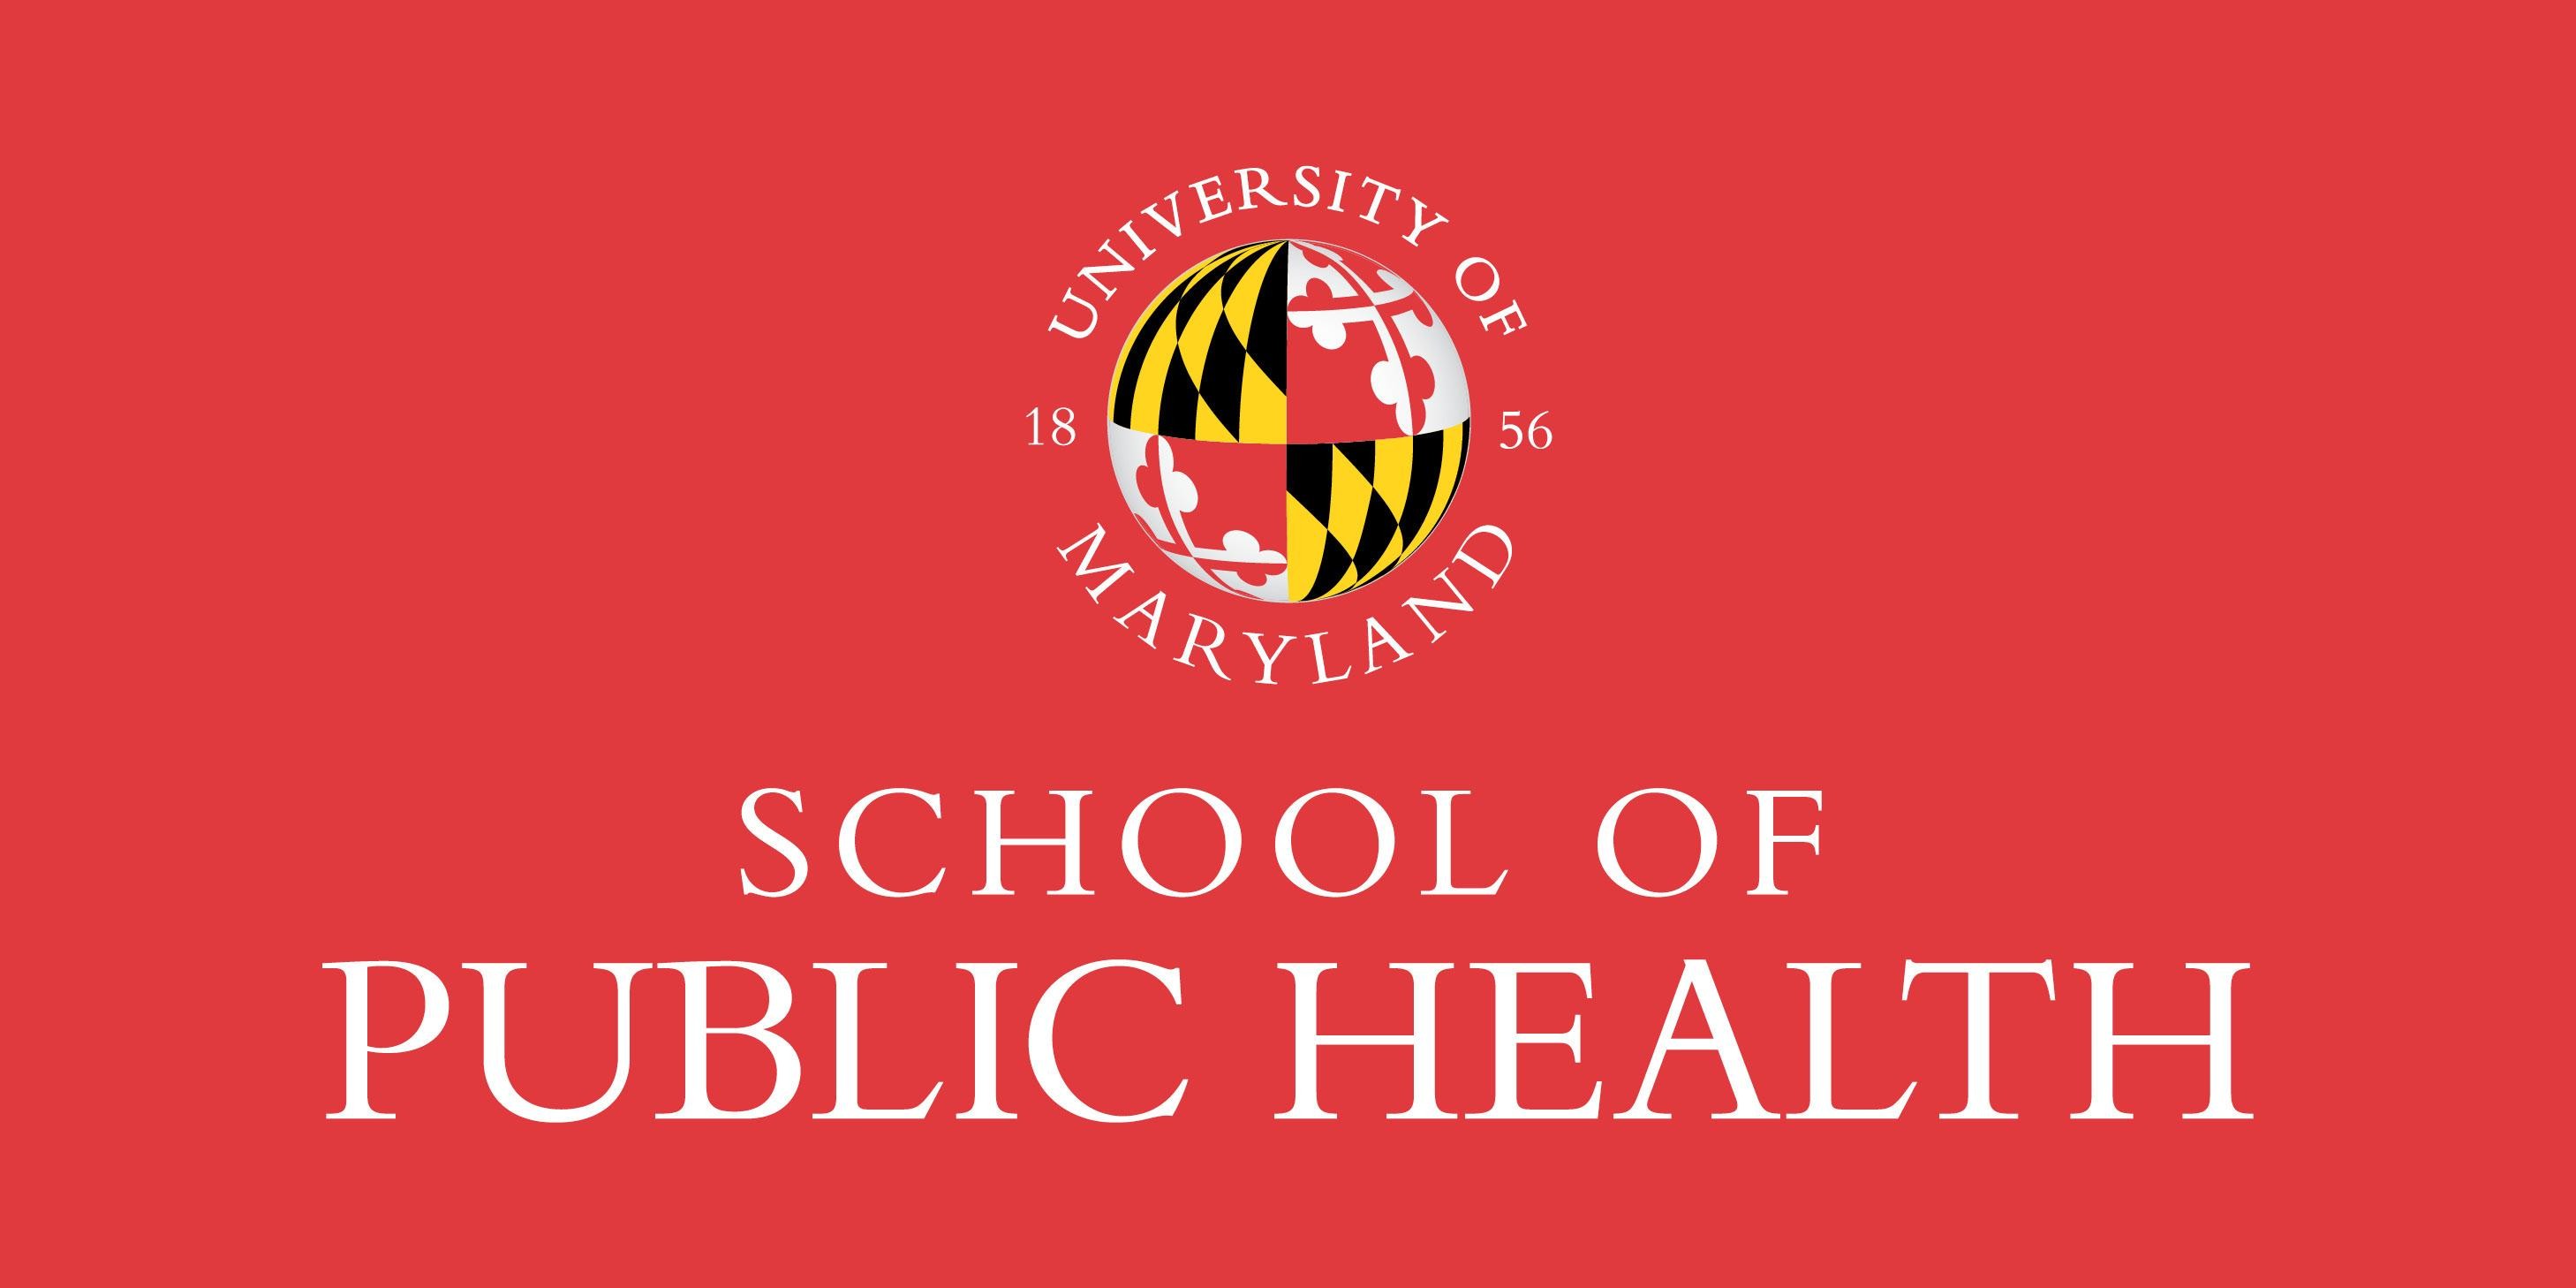 Establishing a foundation for community health research: the importance of trust and partnership | University of Maryland